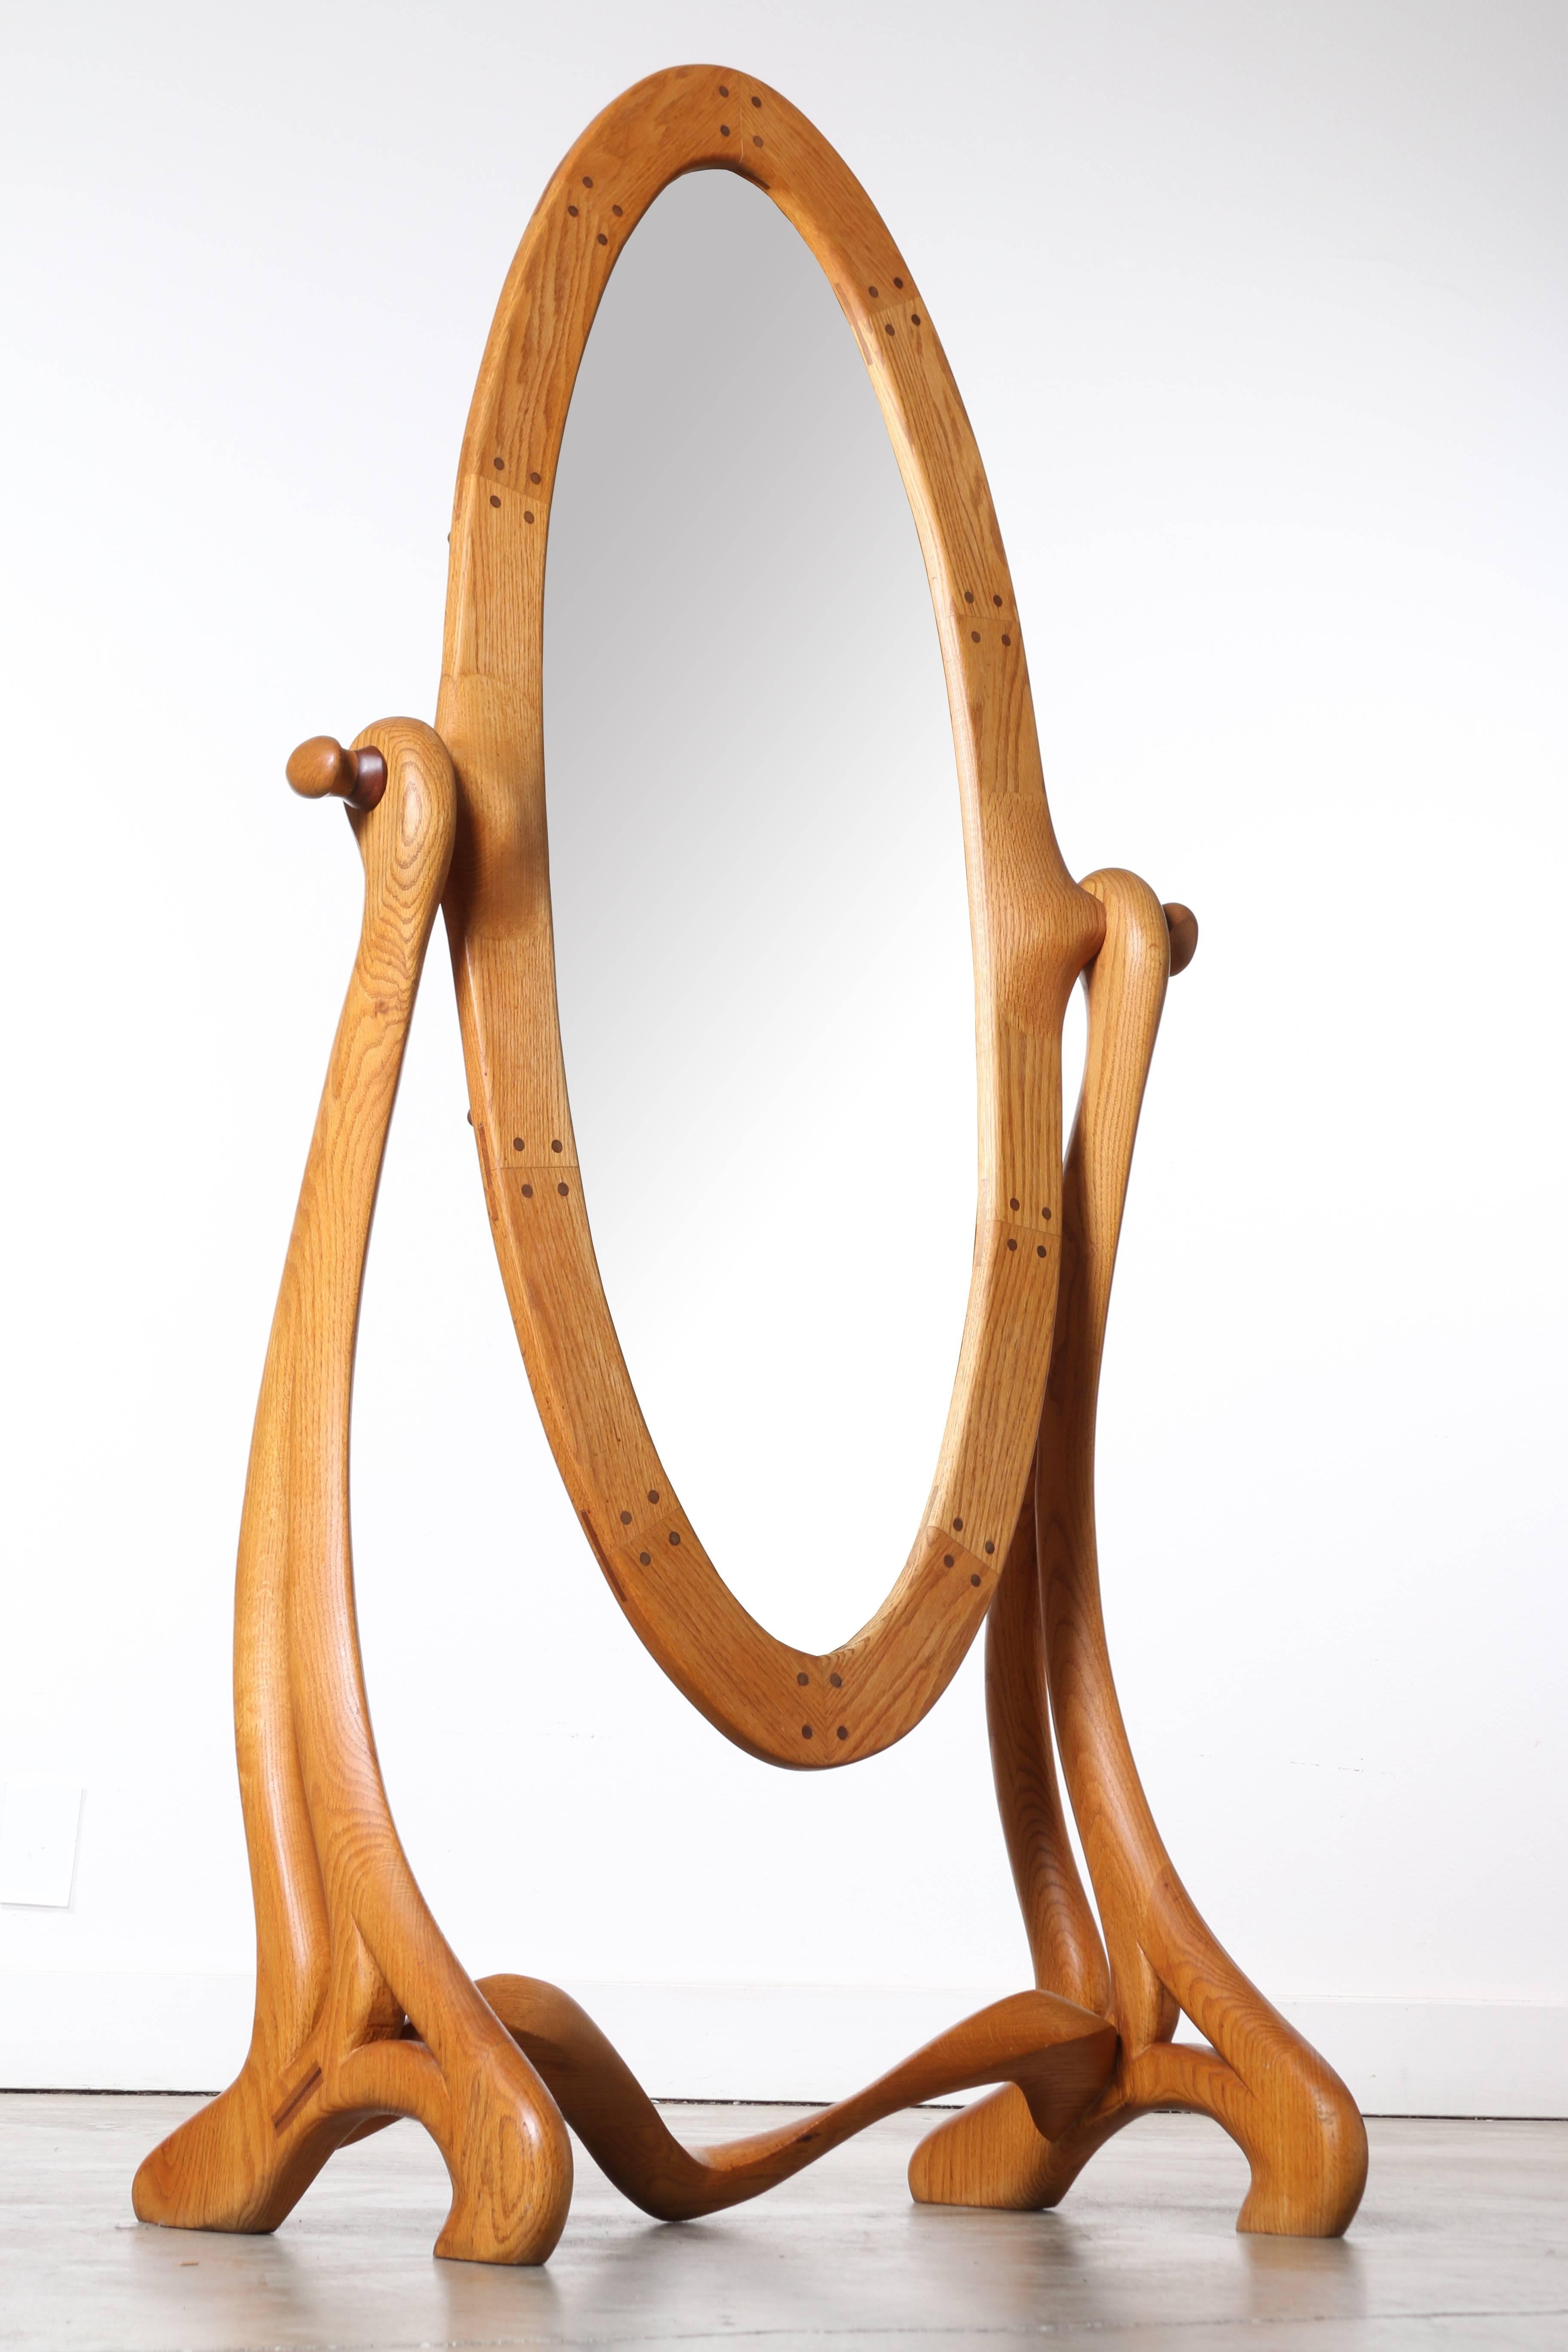 Wonderful organic lines on this California School floor mirror. All turned wood construction with beautiful joints of biscuits and dowels. Mirror is held in place with wooden wishbone holders, it may be adjusted to any angle required and secured in